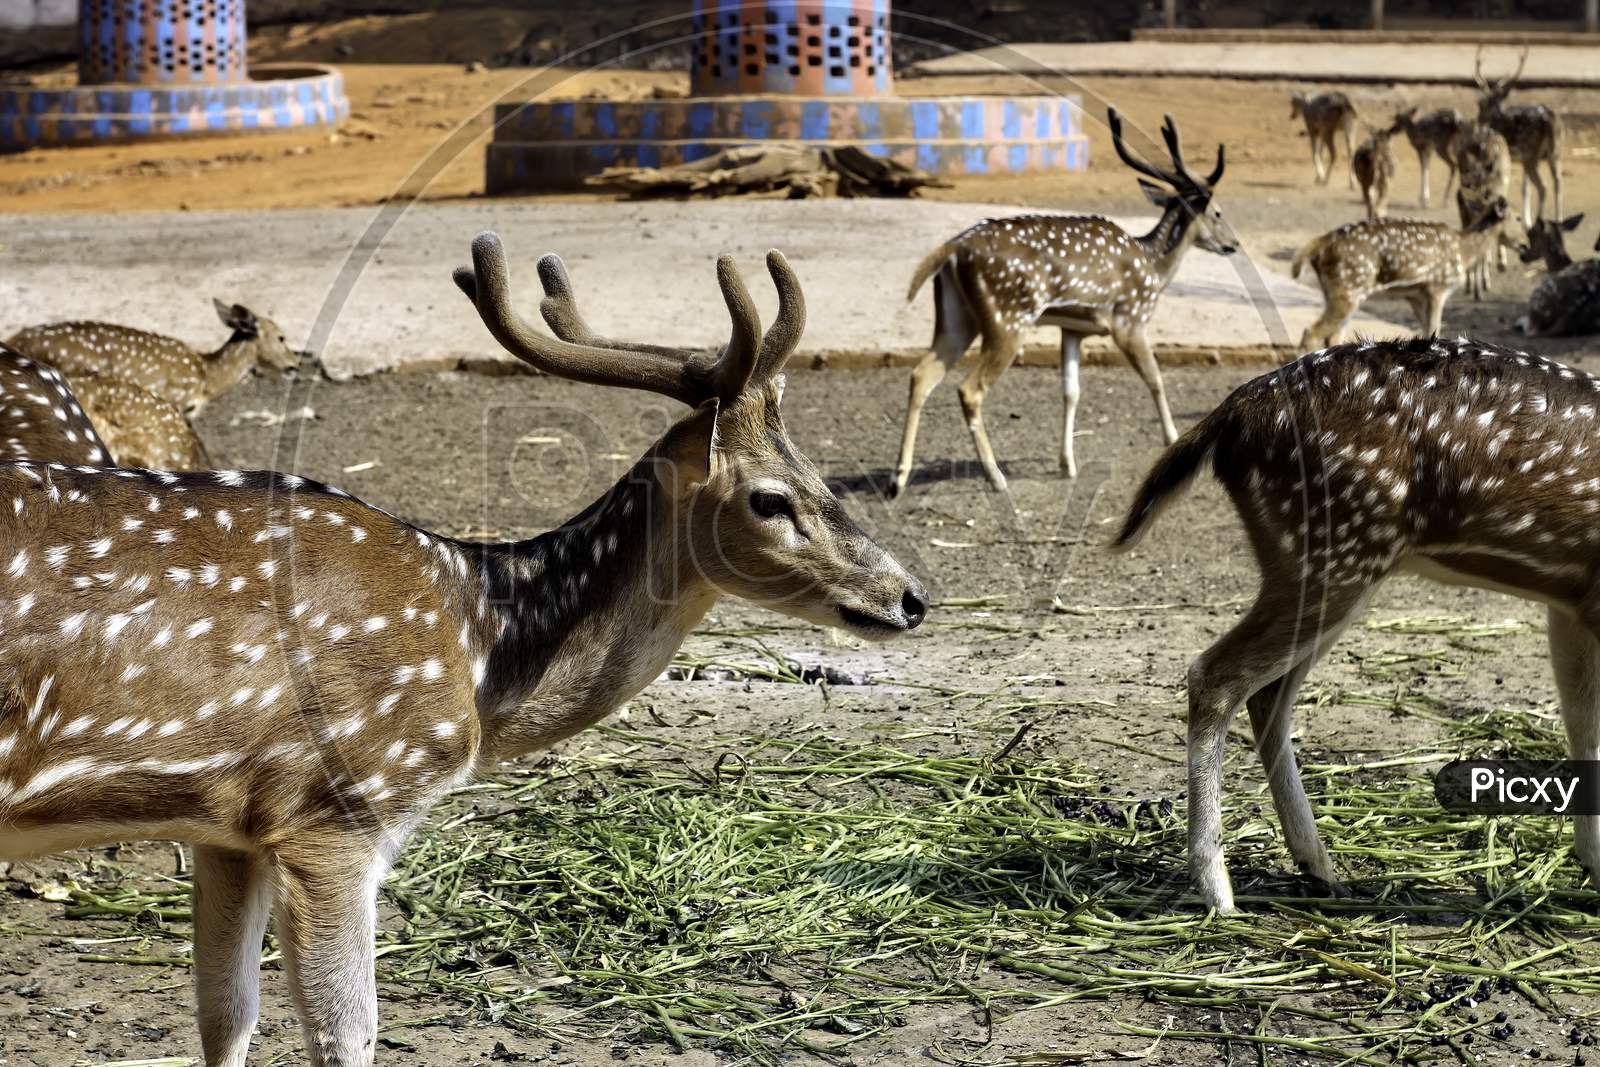 A Group Of Spotted Deer In The Zoo